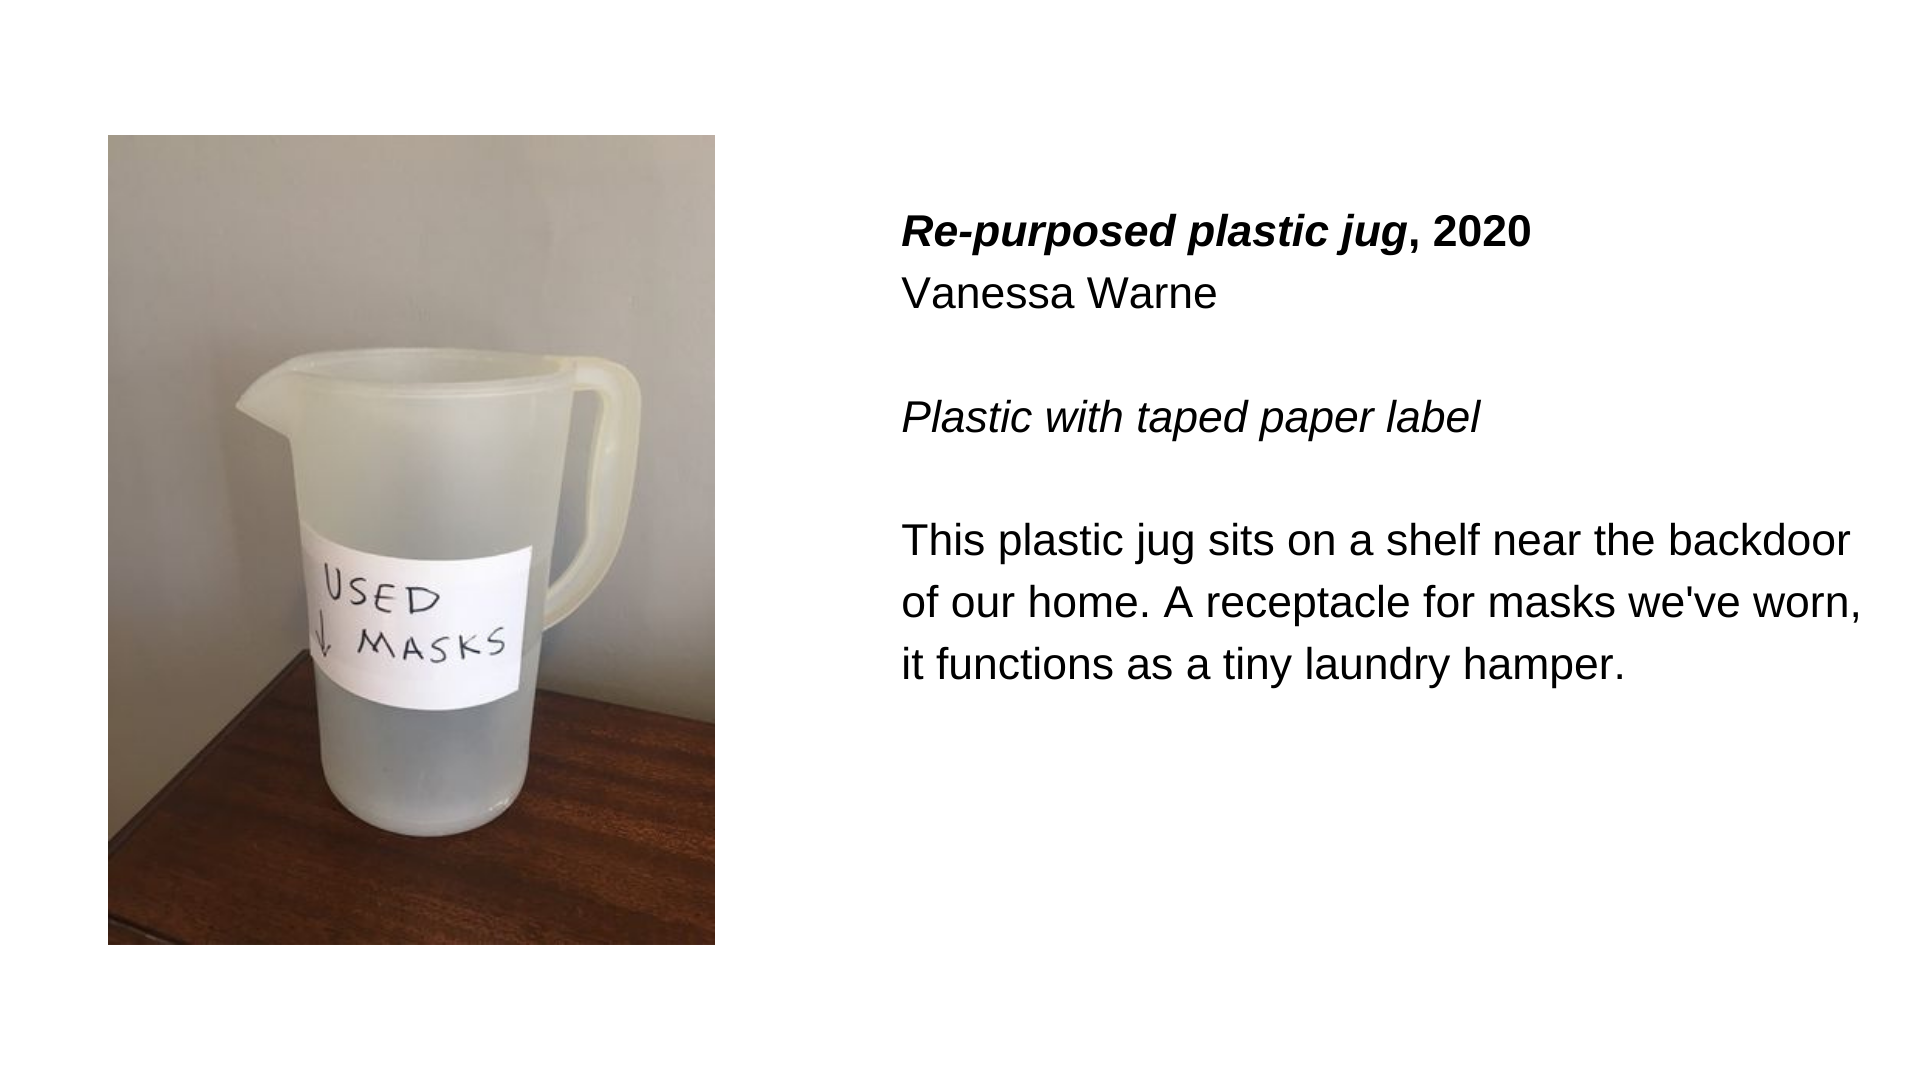  A plastic jug with a label that says “Used Masks”. The image is next to the text “Re-purposed plastic jug, 2020 - Vanessa Warne. This plastic jug sits on a shelf near the backdoor of our home. A receptacle for masks we've worn, it functions as a tin